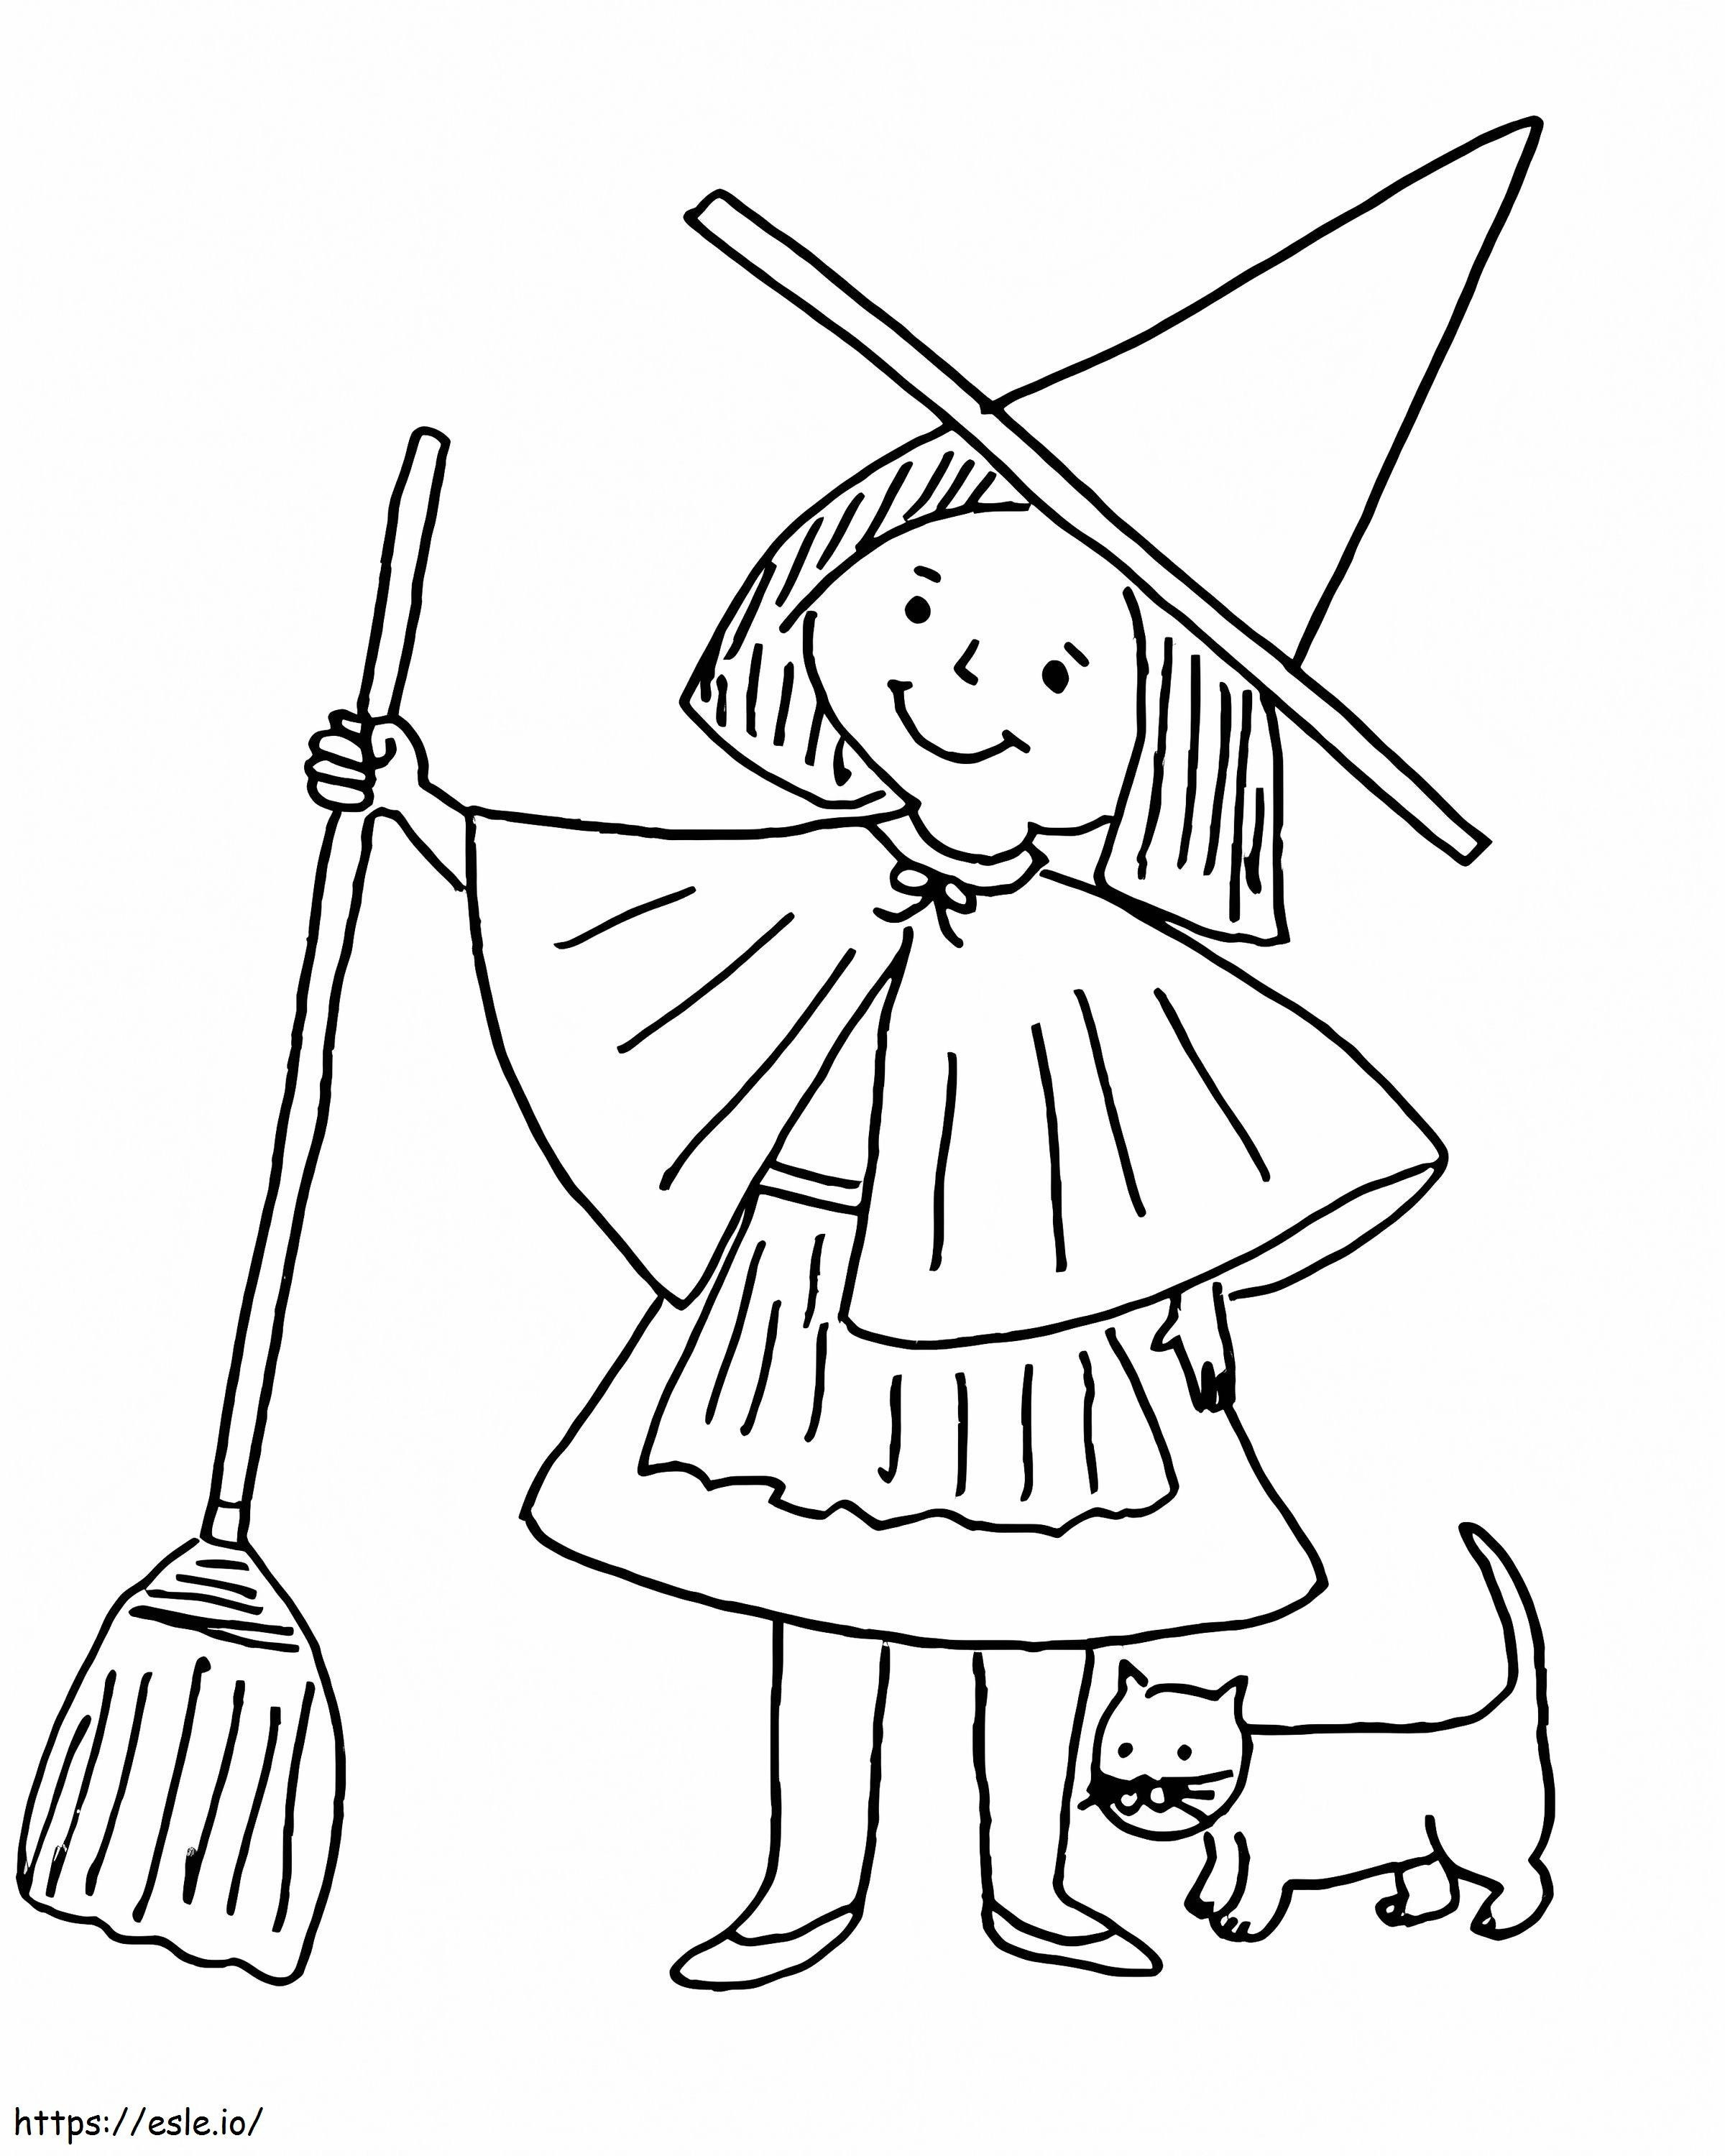 Drawing Of Witch Girl And Cat coloring page